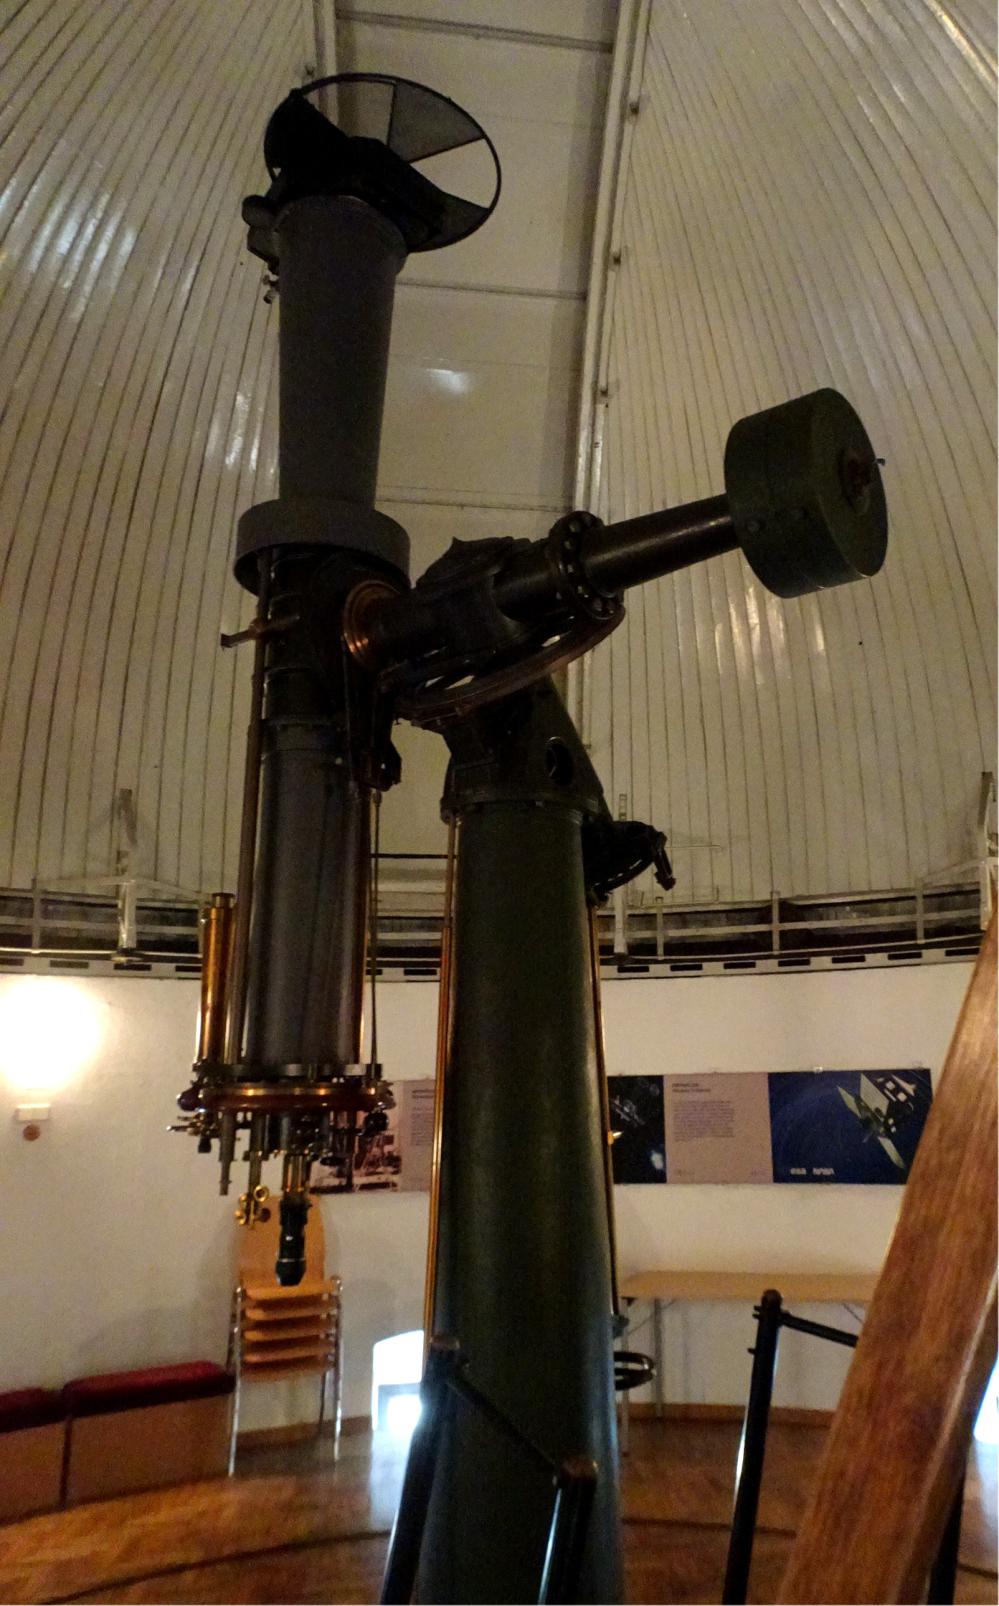 Heliometer, made by A. Repsold & Söhne of Ham